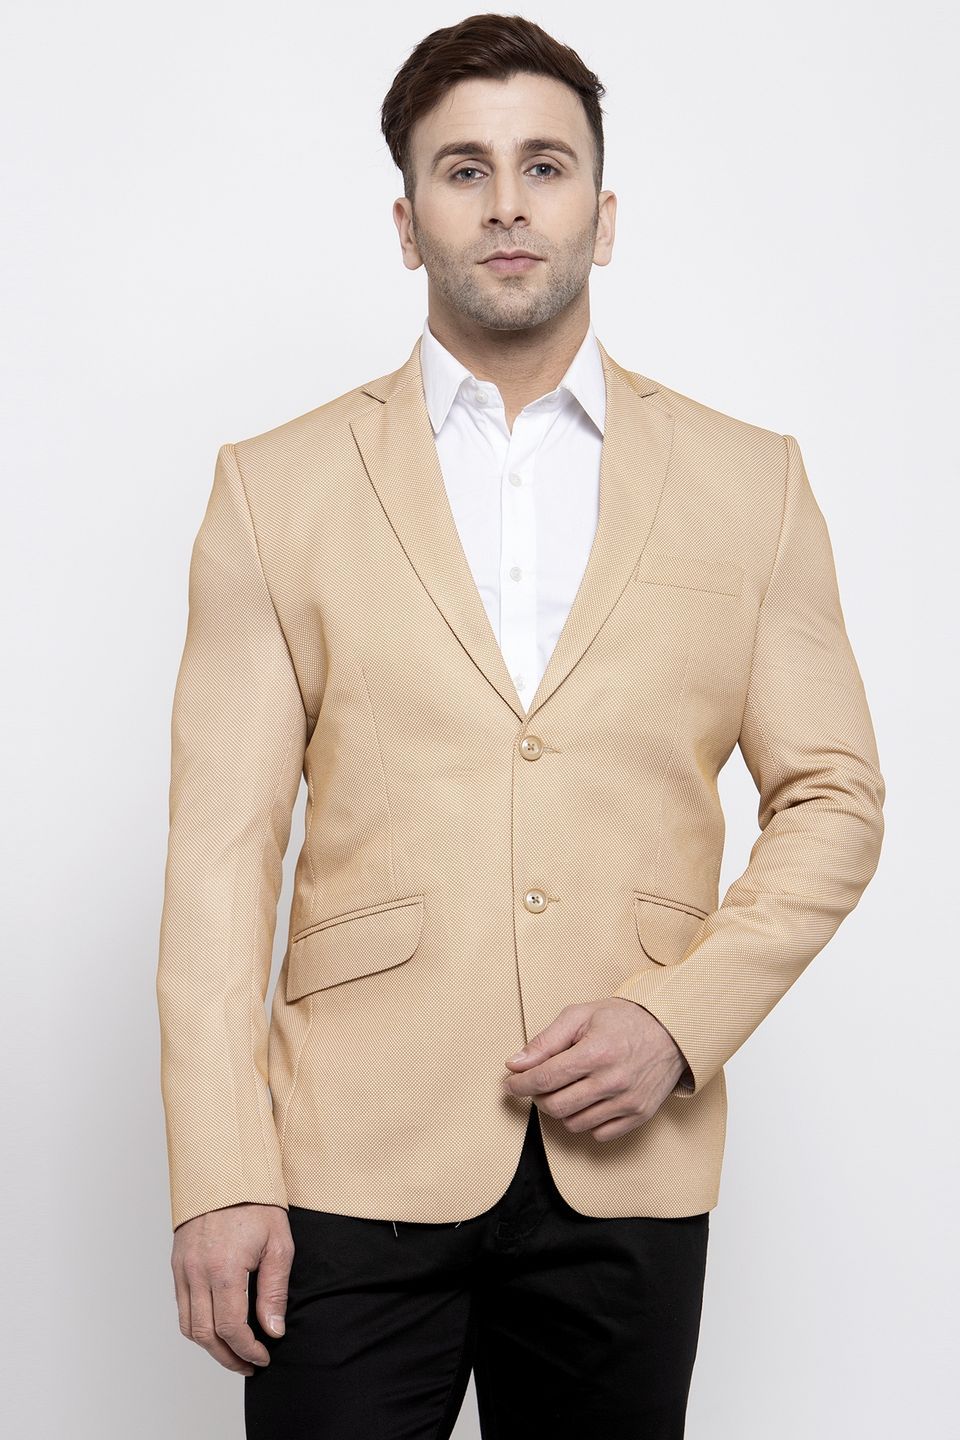 WINTAGE Men's Polyester Cotton Festive and Casual Blazer Coat Jacket :  Silver